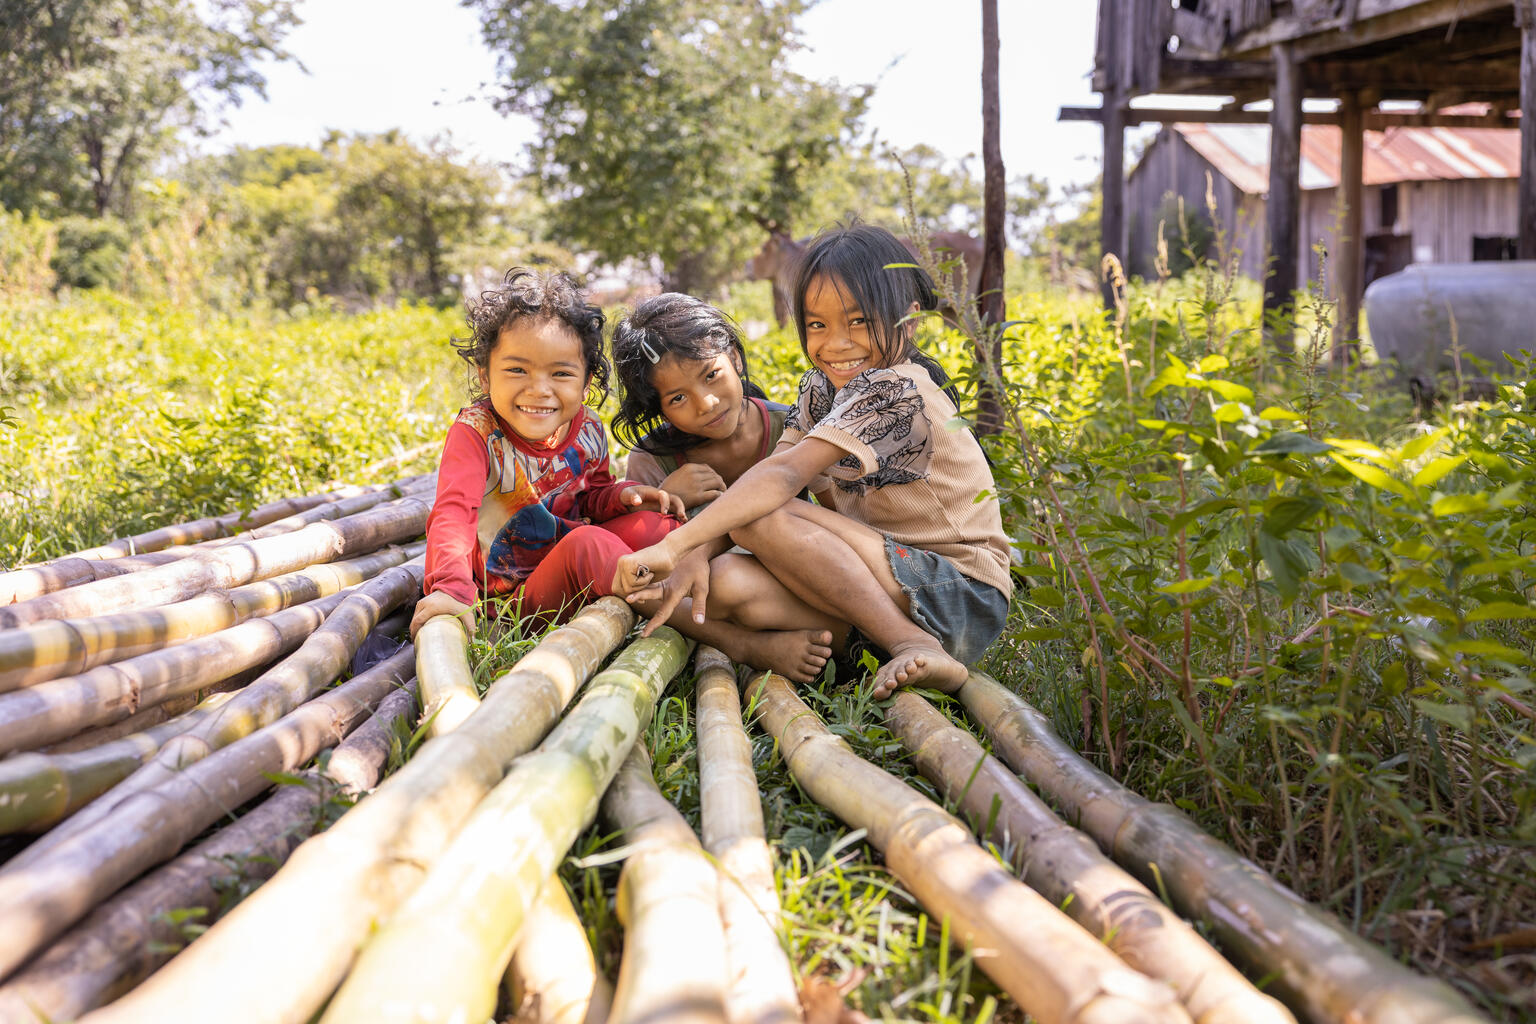 On 22 June 2022, three little girls played hide and seek around her house in Sras village, located in one of the hard-to-reach areas, Thmey commune, Chetborey district, Kratie Province (about 380Km from Phnom Penh) in the northeast part of Cambodia.